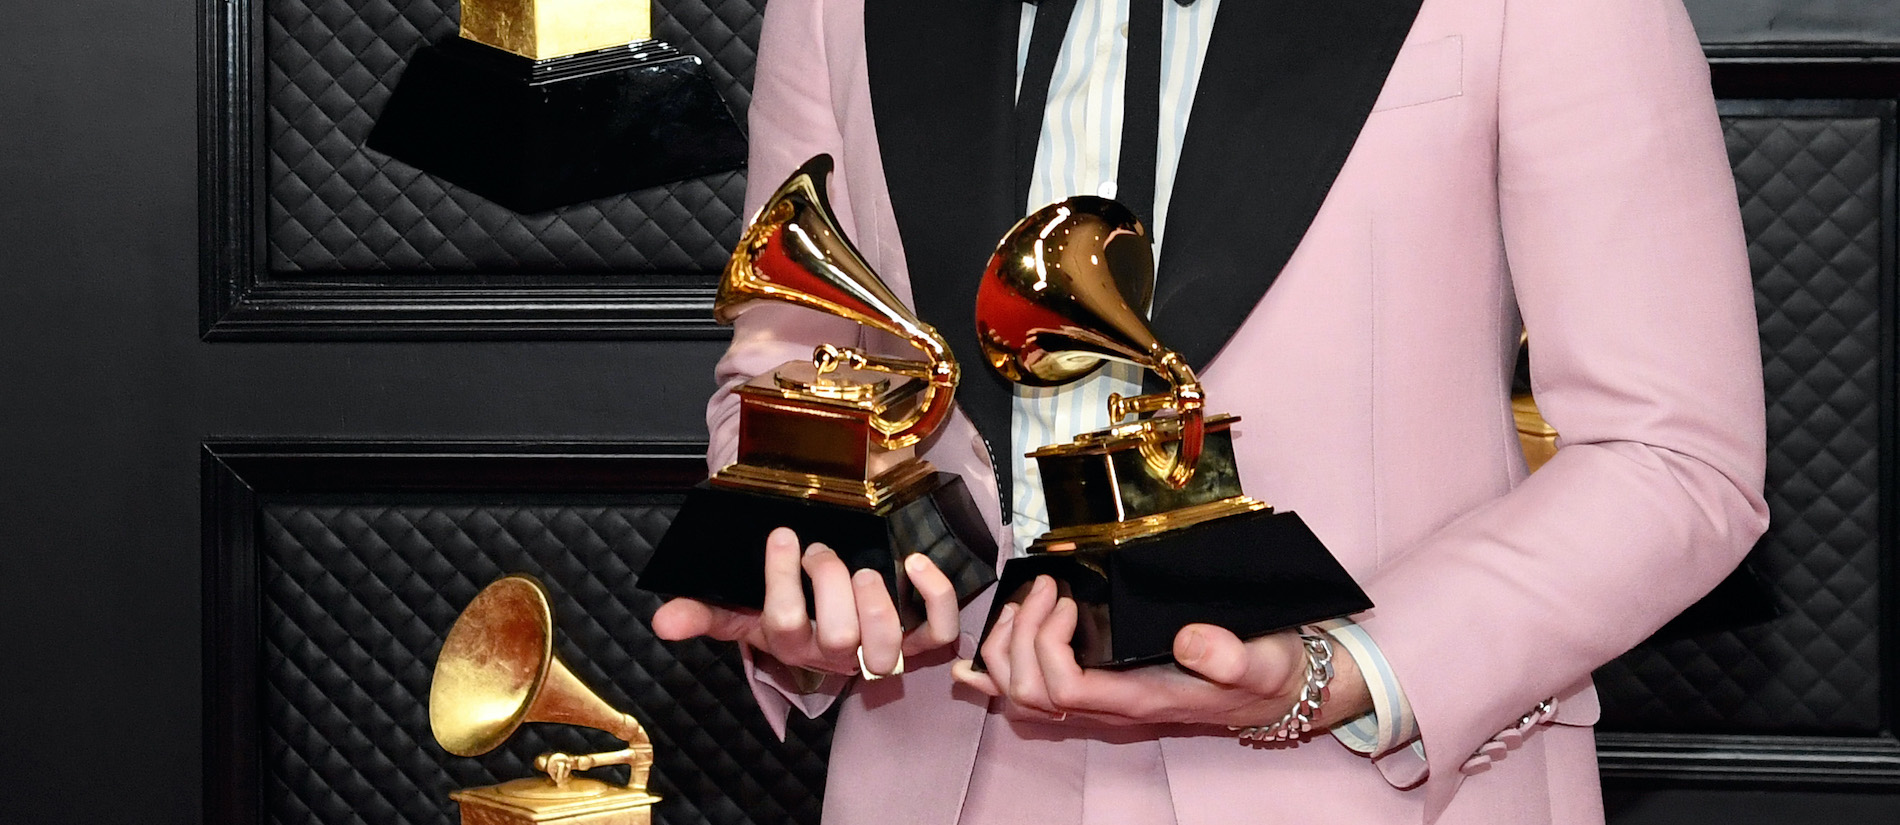 The 2021 Grammys Had Less Than Half As Many Viewers As Last Year